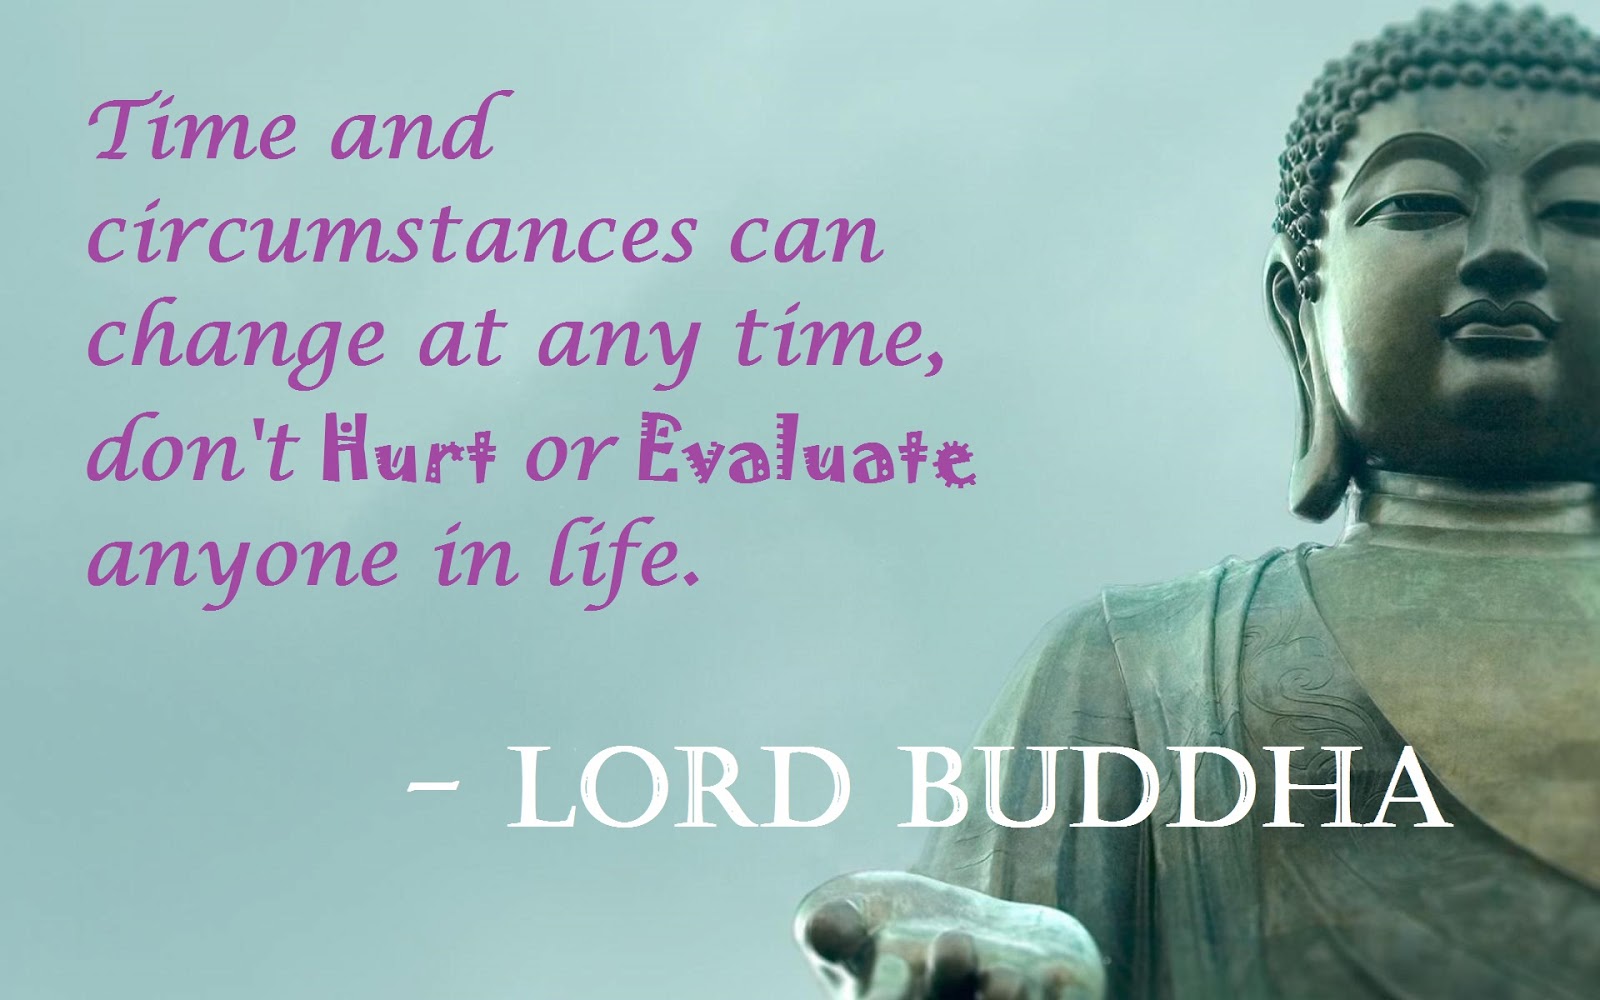 Buddha Quotes Online: Time and circumstances can change at any time